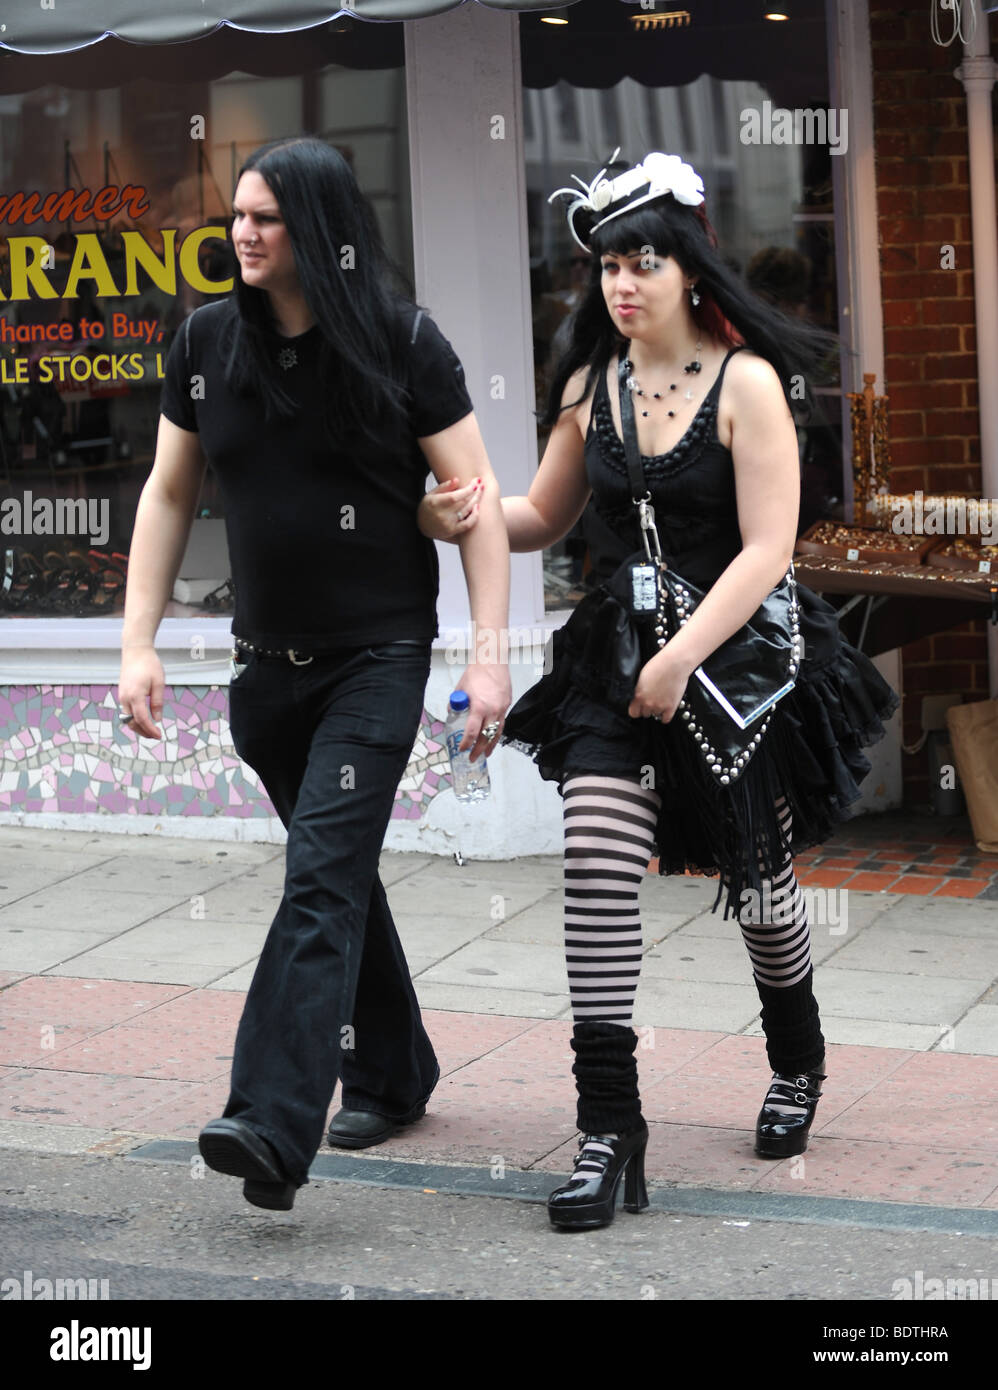 Couple wearing goth style fashion walking through Brighton on August Bank Holiday Stock Photo